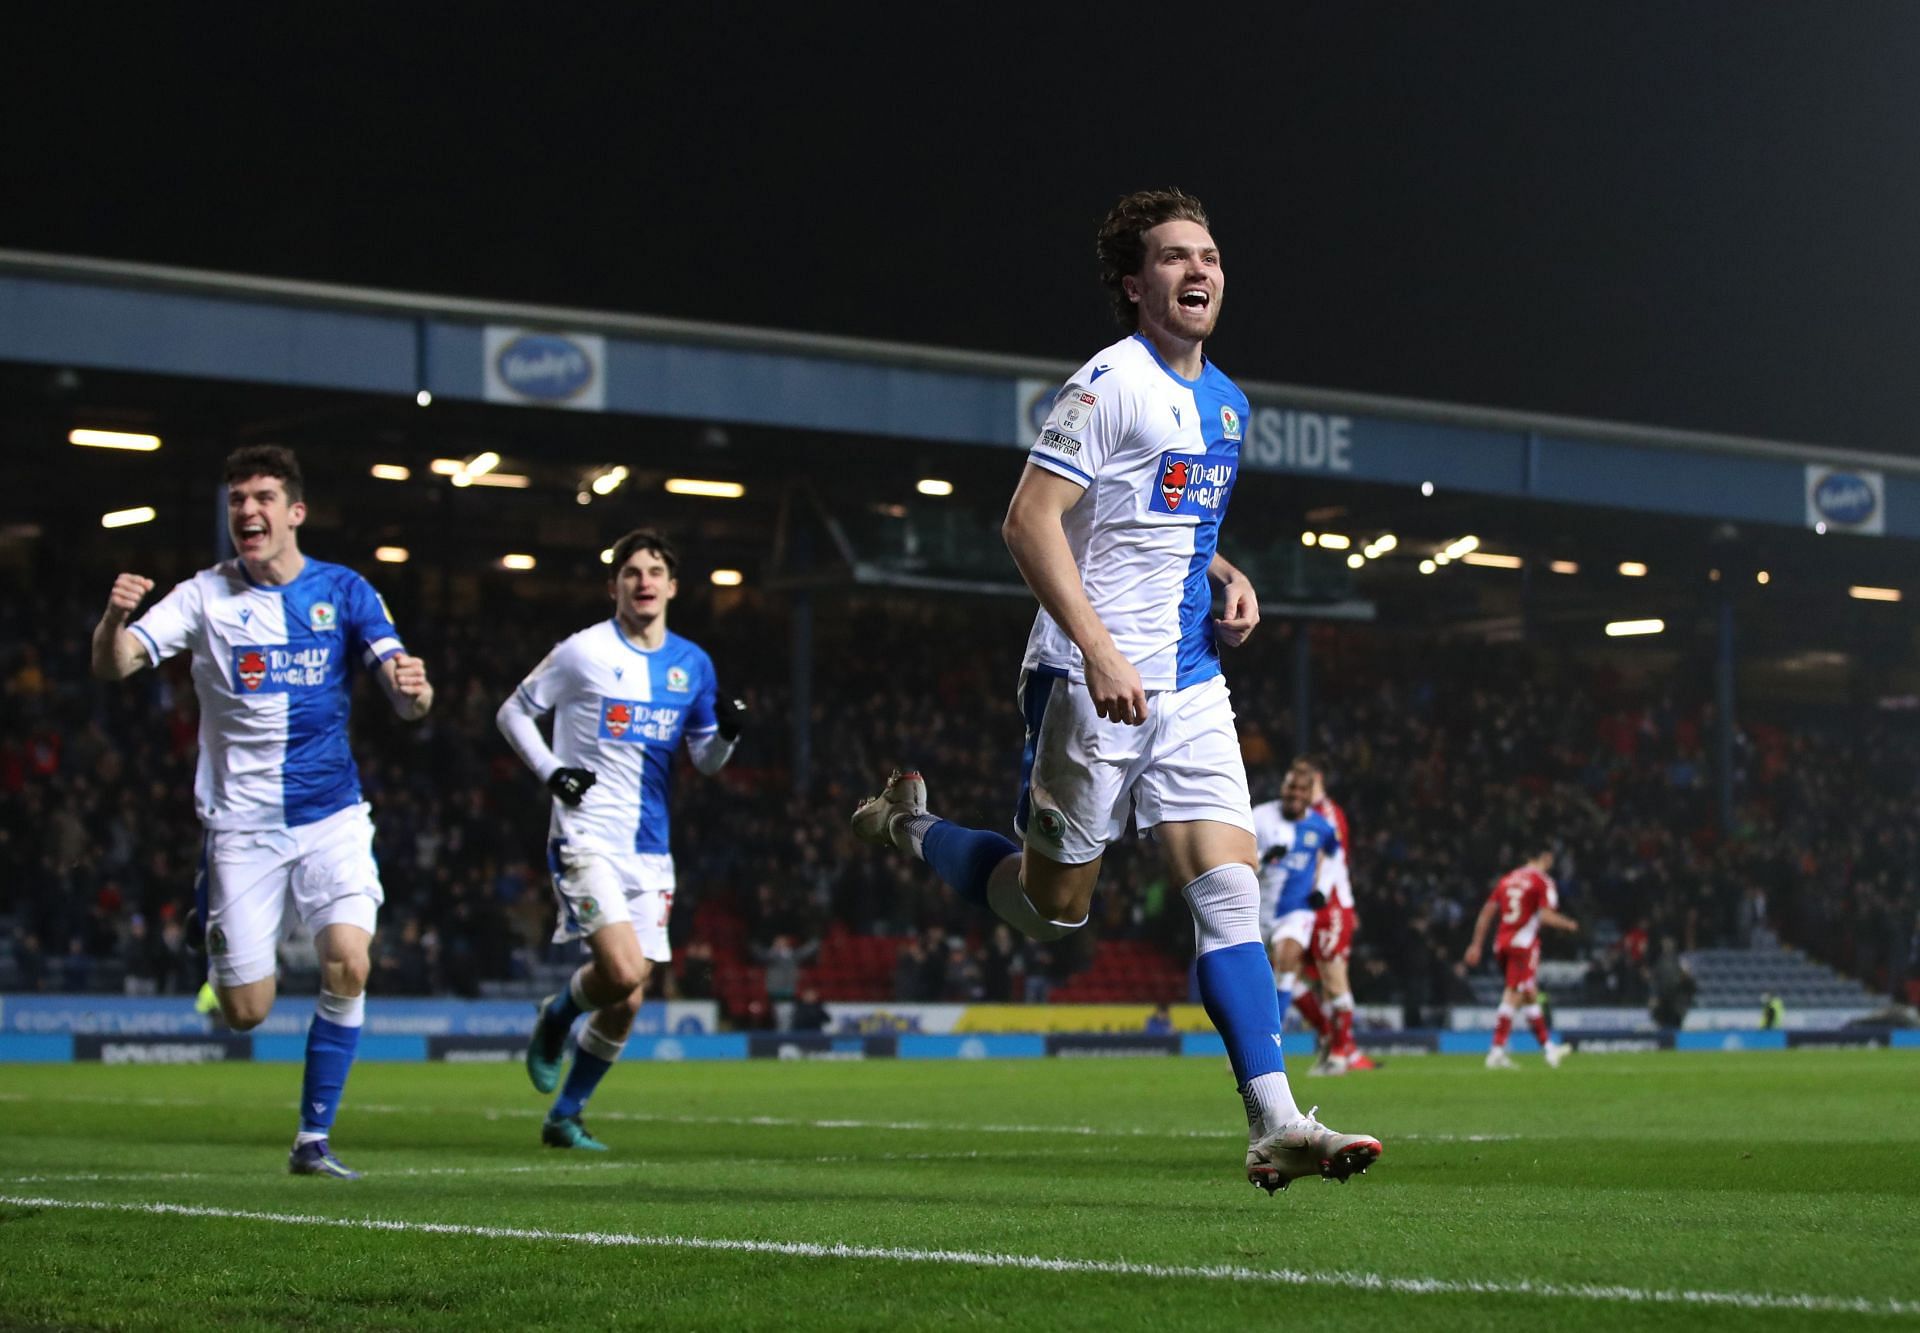 Blackburn are looking to return to form